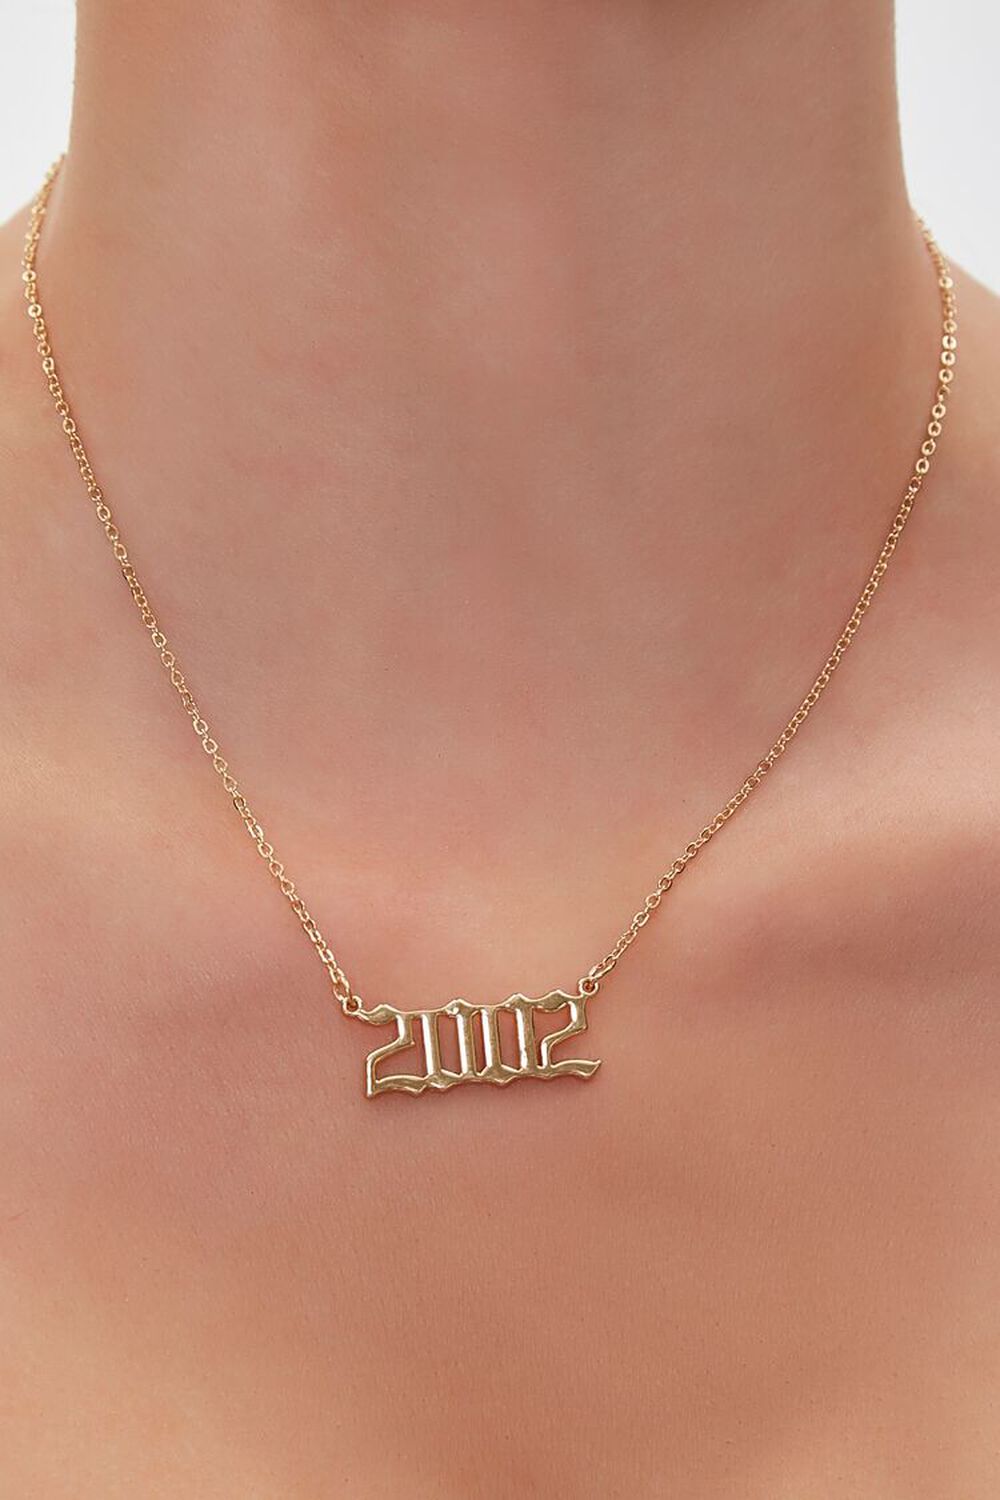 GOLD/2002 Year Pendant Necklace, image 1